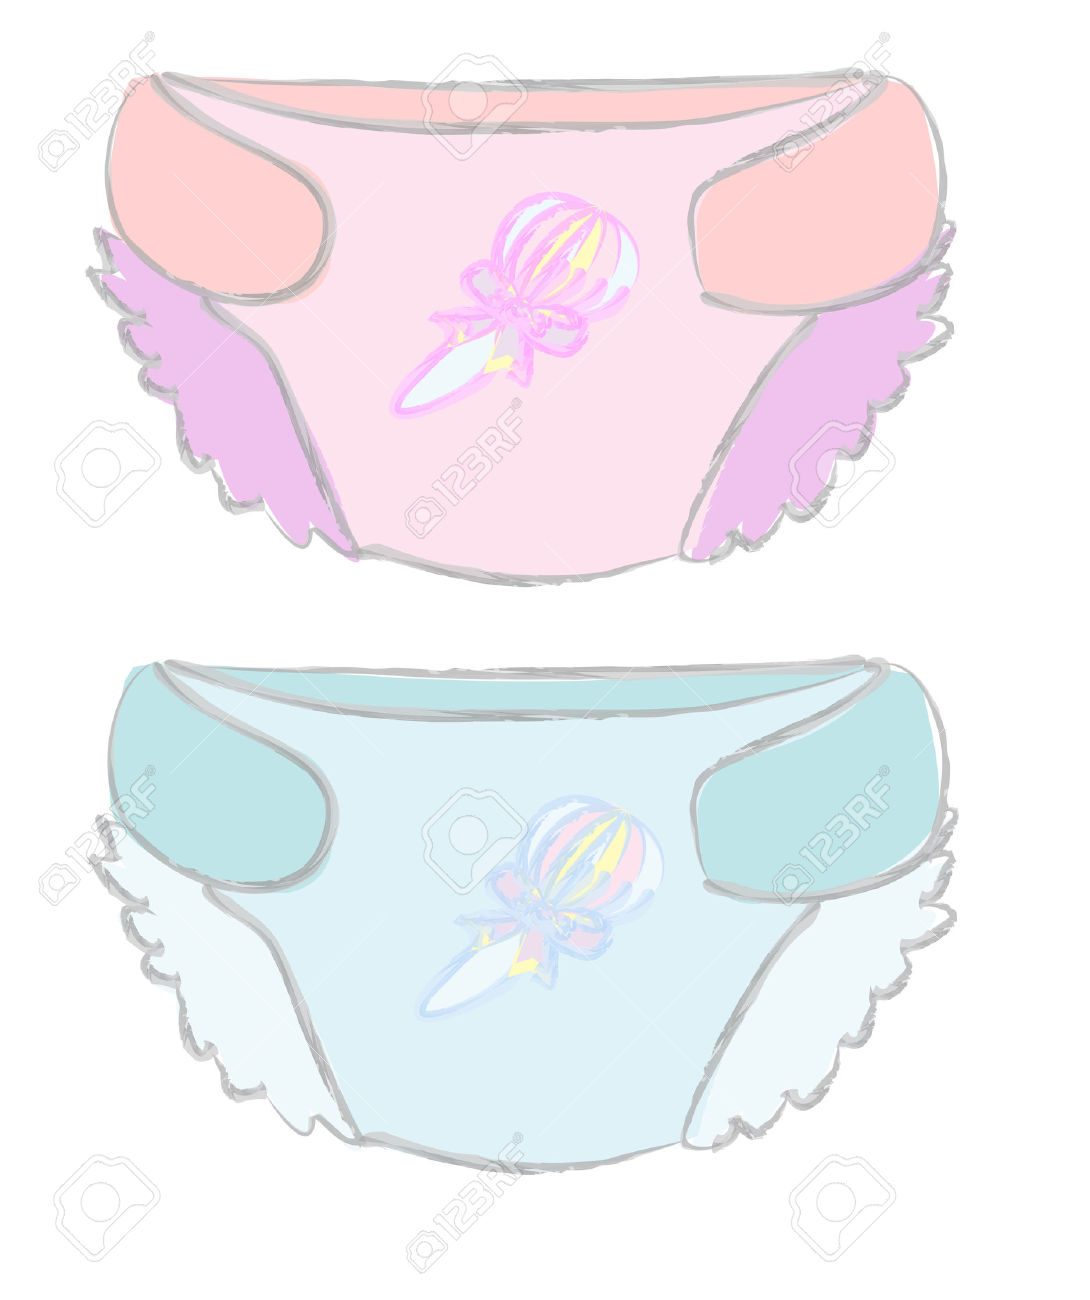 clipart of baby diapers - photo #16